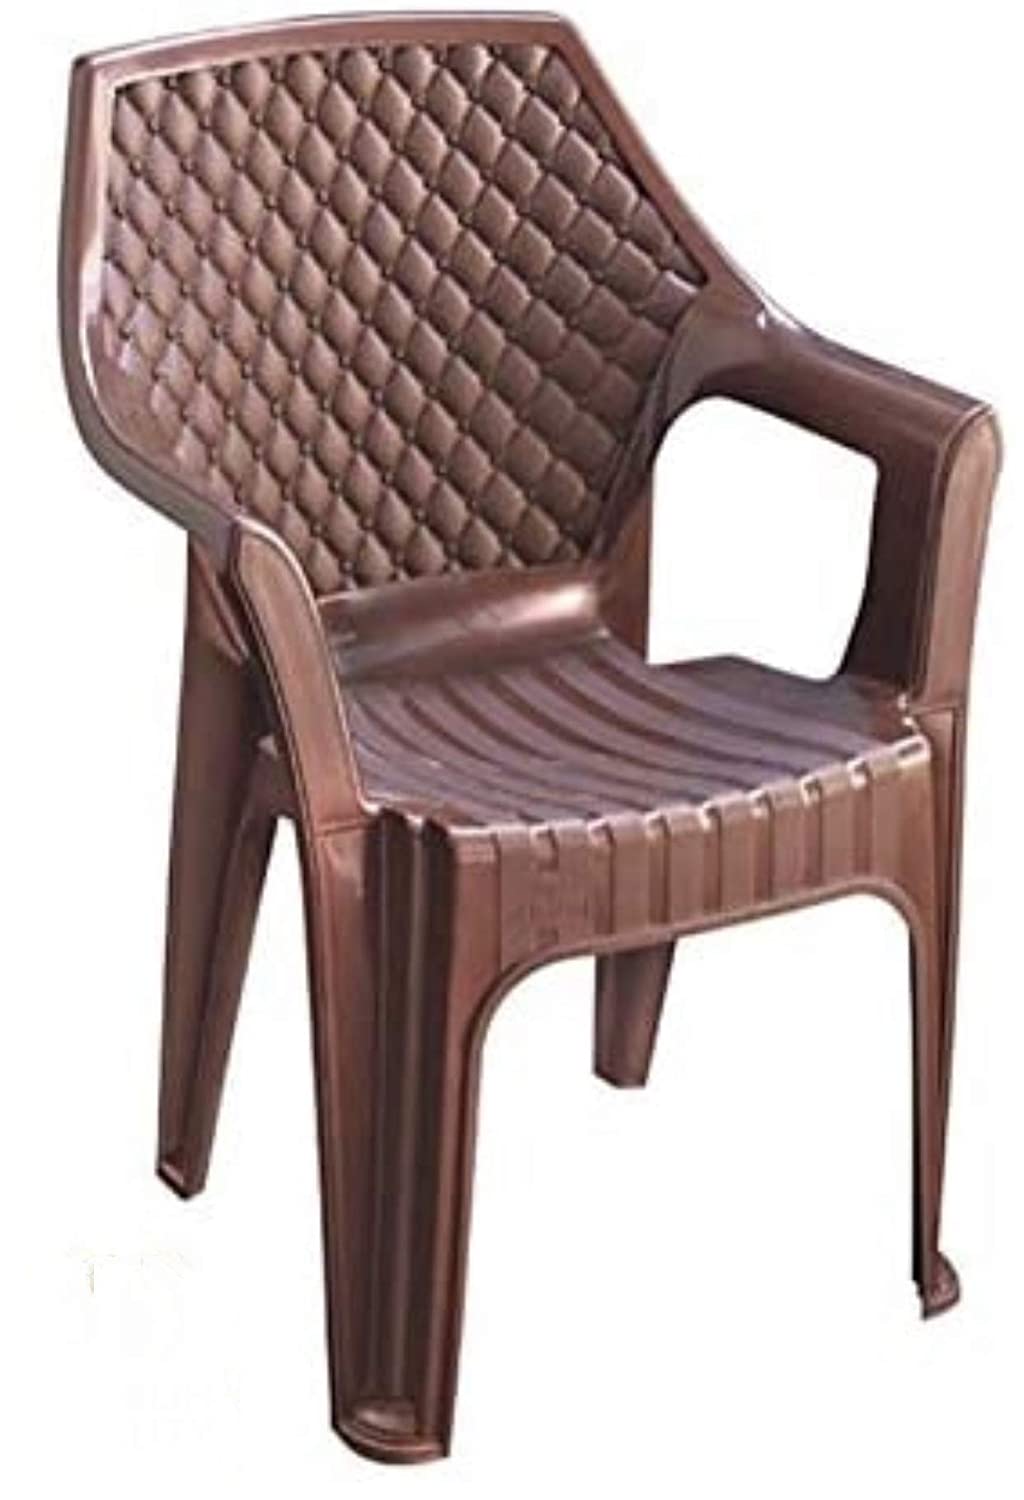 Plastic Chairs Online | Shop Now - Best Sitting Chairs